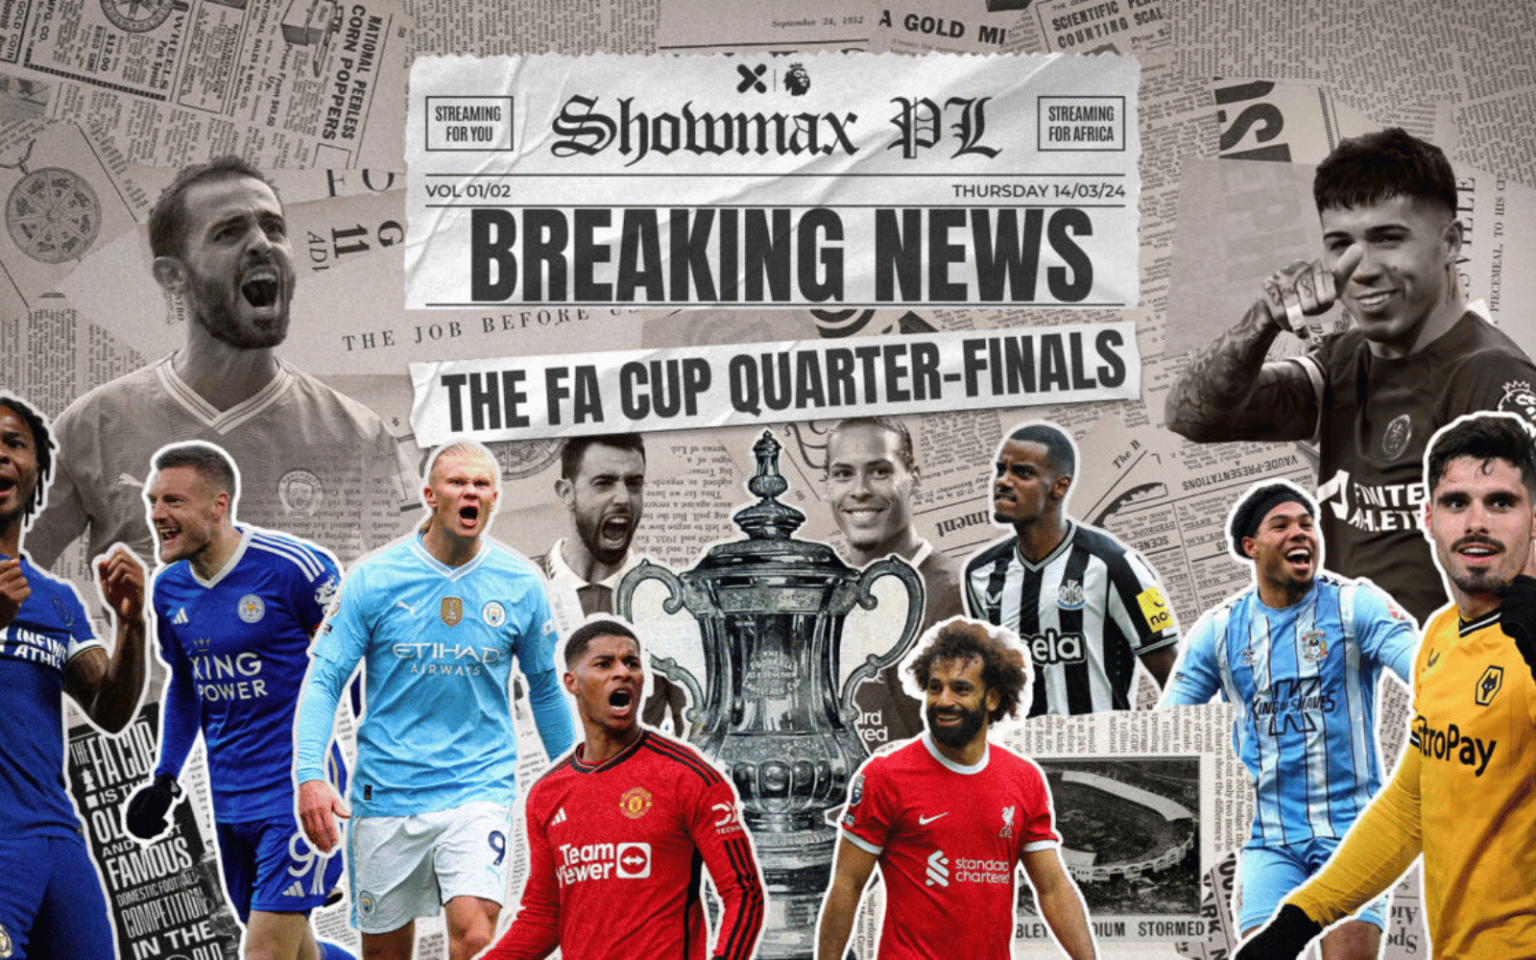 Showmax Adds FA Cup Quarter Finals To Premier League Streaming Package